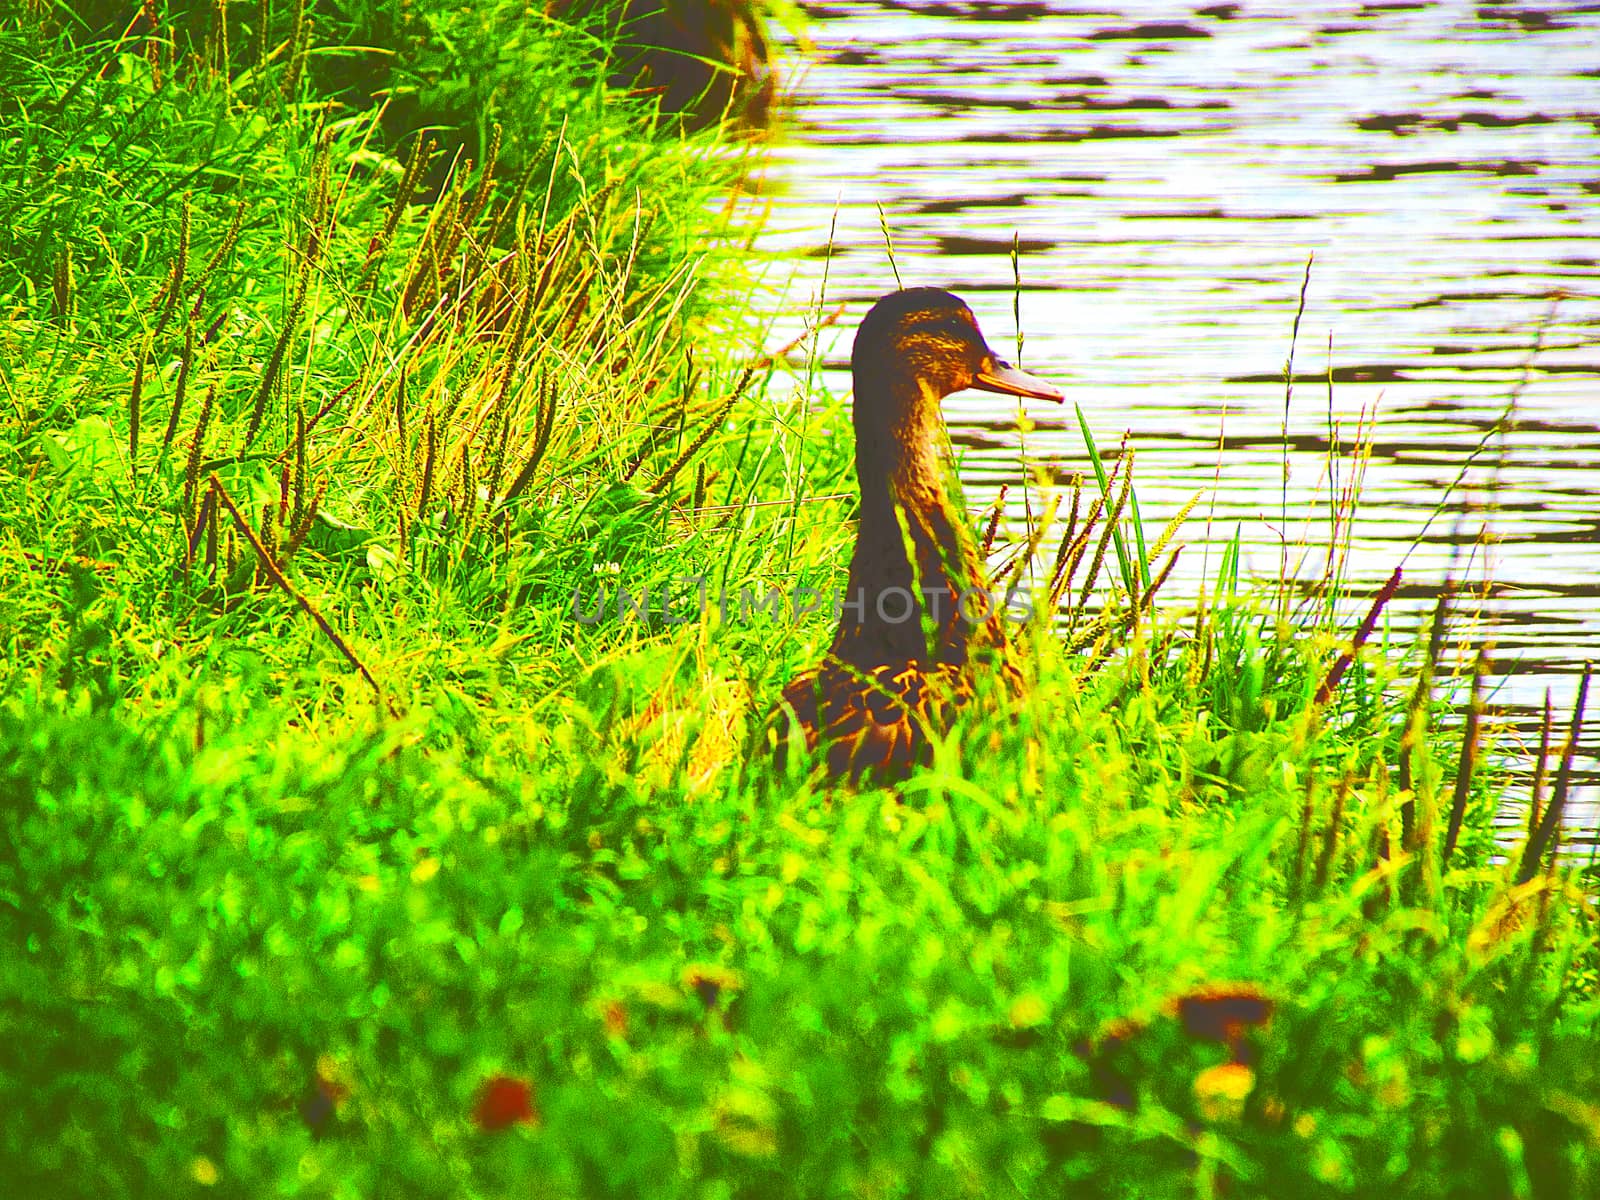 one duck sits on the bank of the grass with its neck stretched out and looks at the pond toning